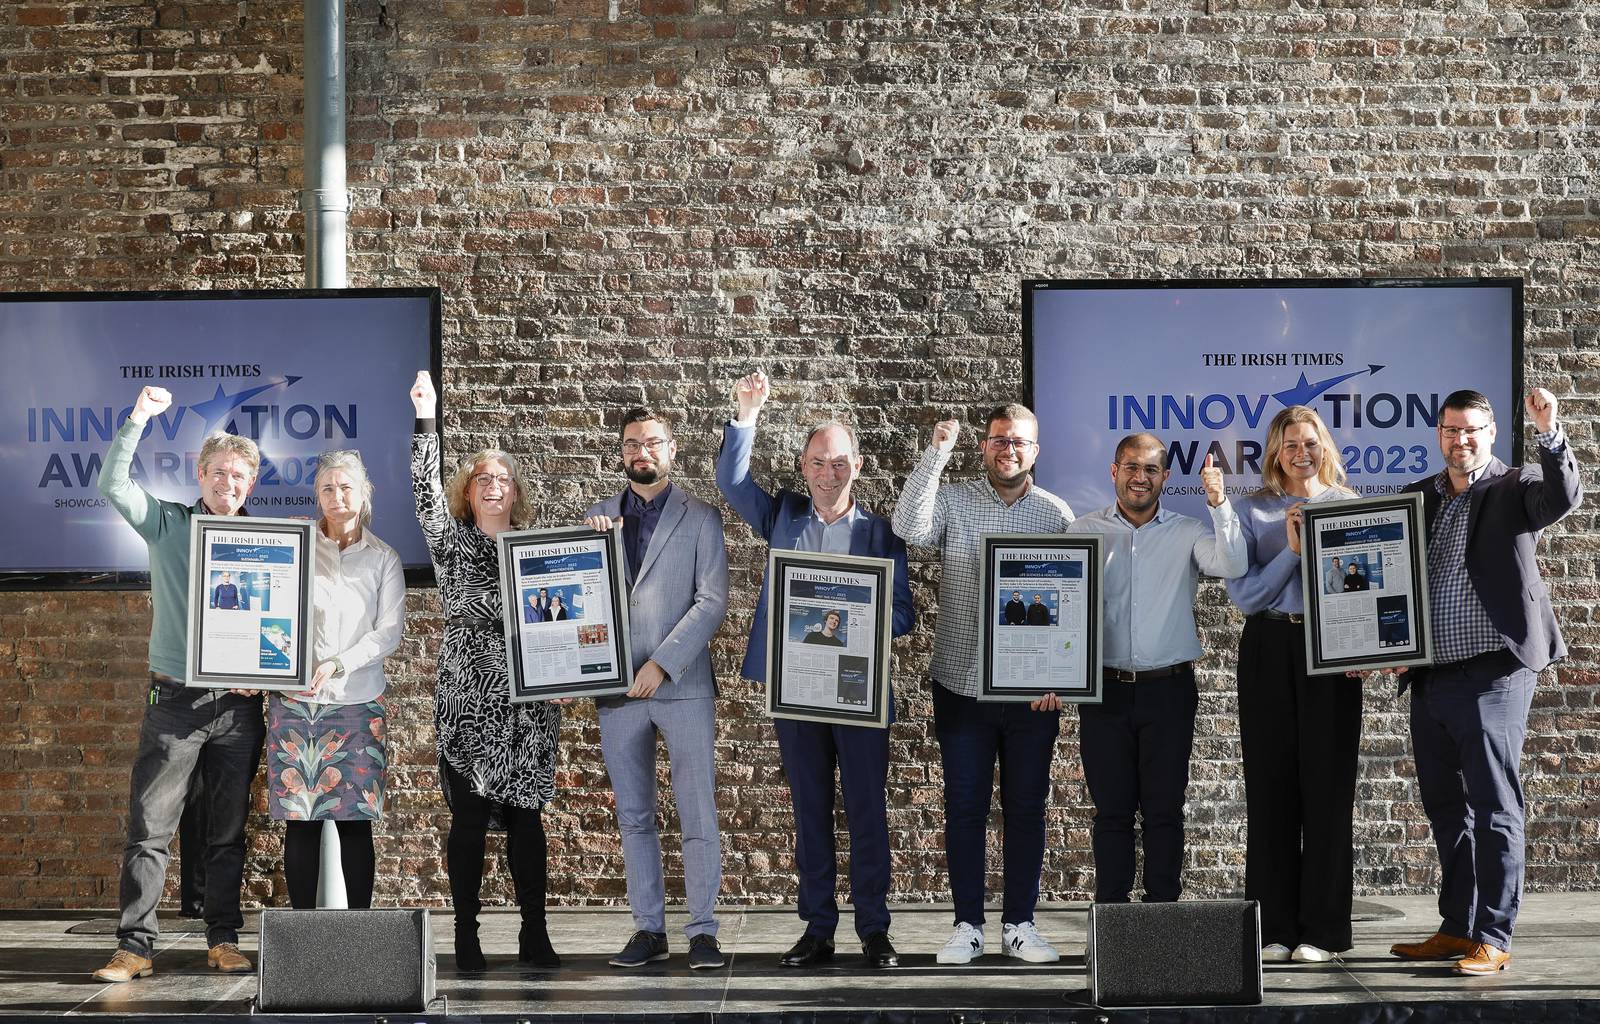 (From left): Kieran Coffey and Fiona Kelleher of MyGug, Julie Connelly and Matej Ulicny of AI Mapit, Prof Denis Dowling of Infraprint, Muhammad Yassin and Muneer Sawaied of Genicity, and Hannah Thornton and Colin Morrissey of Orreco, all winners at The Irish Times Innovation Awards 2023. Photo: Conor McCabe